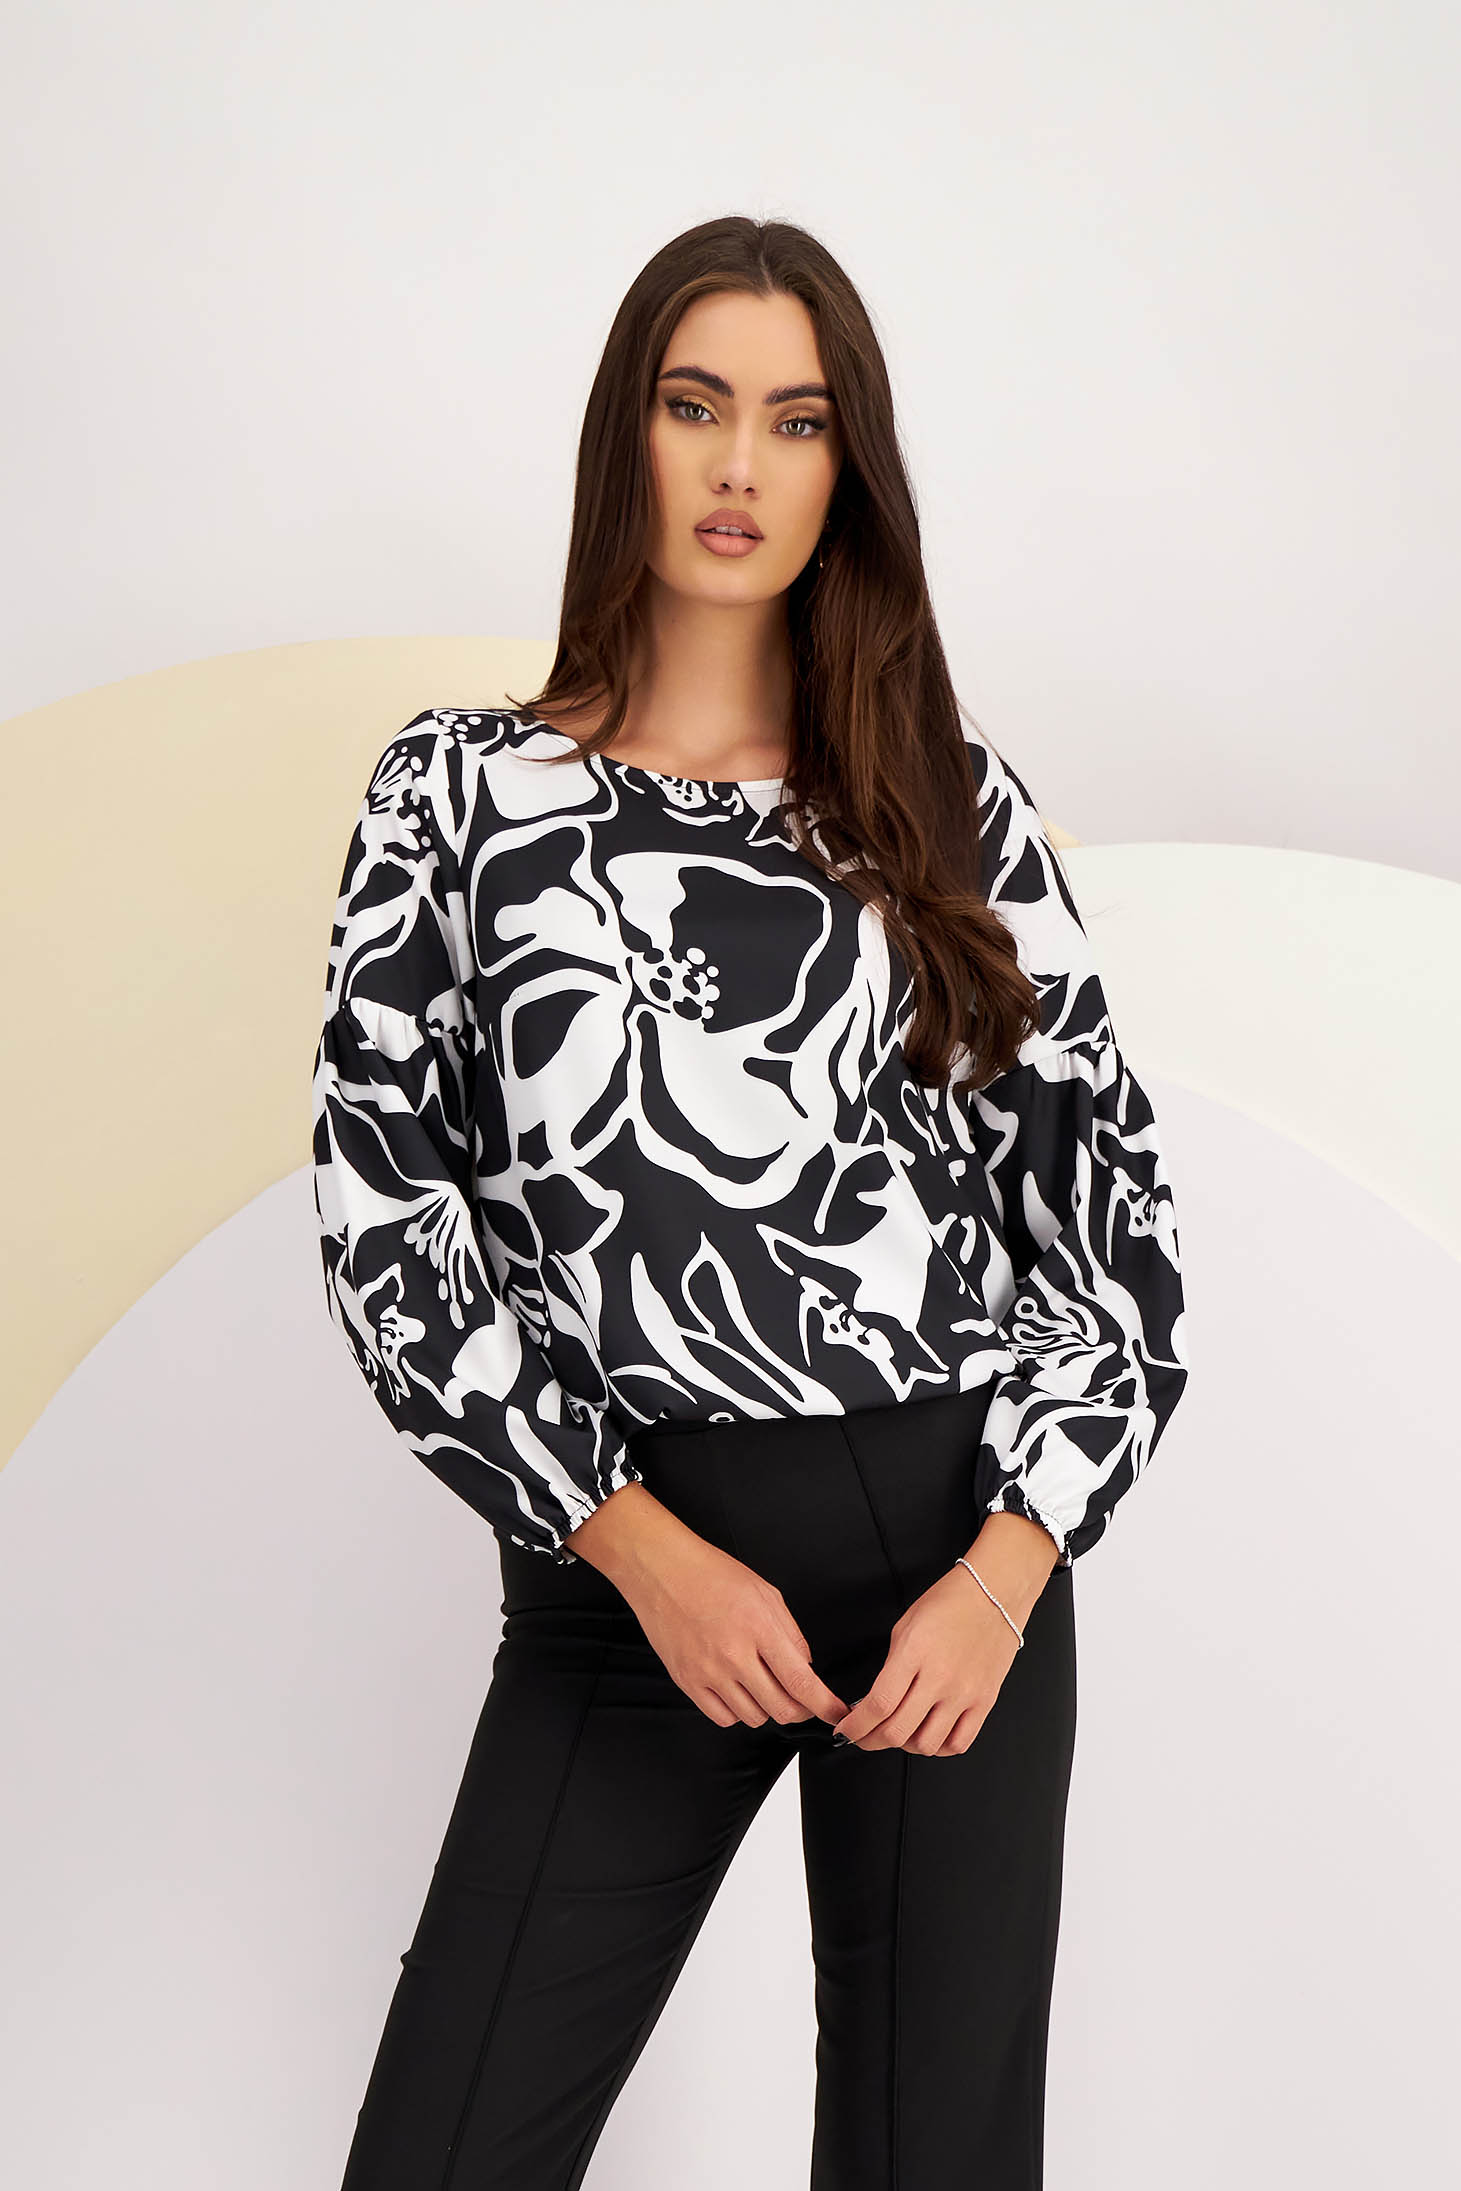 Lady Pandora Blouse for Women Made of Thin Material with Loose Fit and Elastic Waist with Puff Sleeves